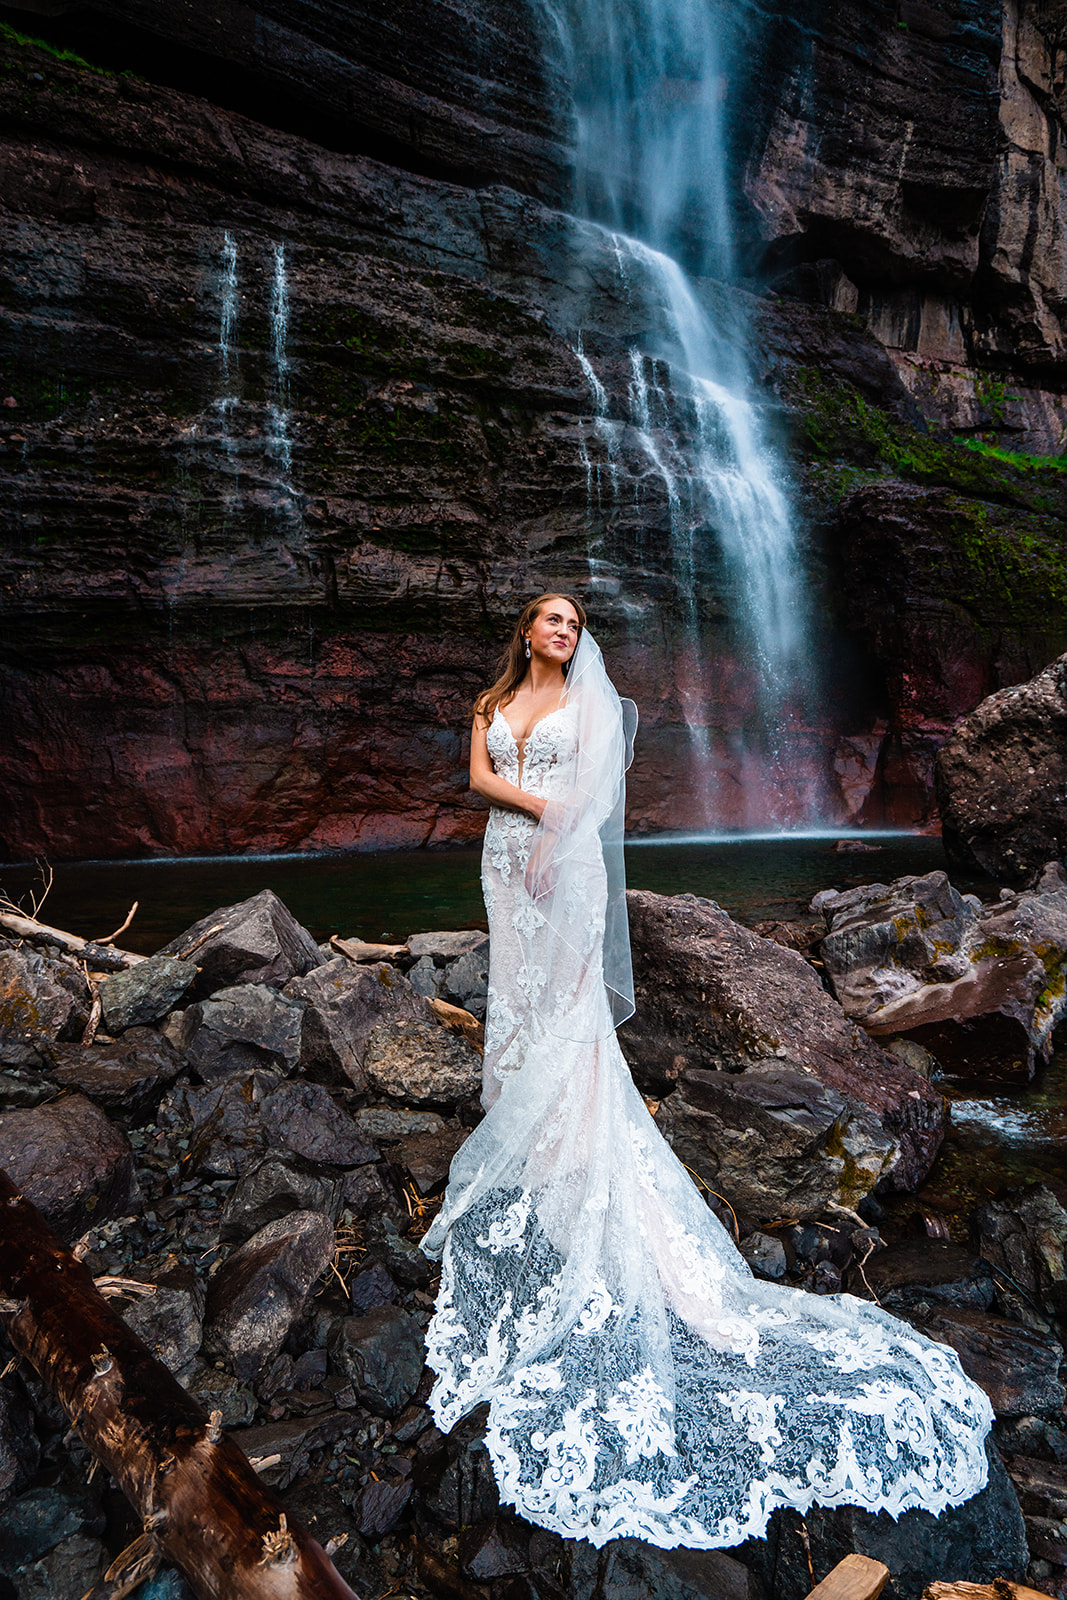 Stunning bride wearing a white A-line elopement dress in front of Bridal Veil Falls